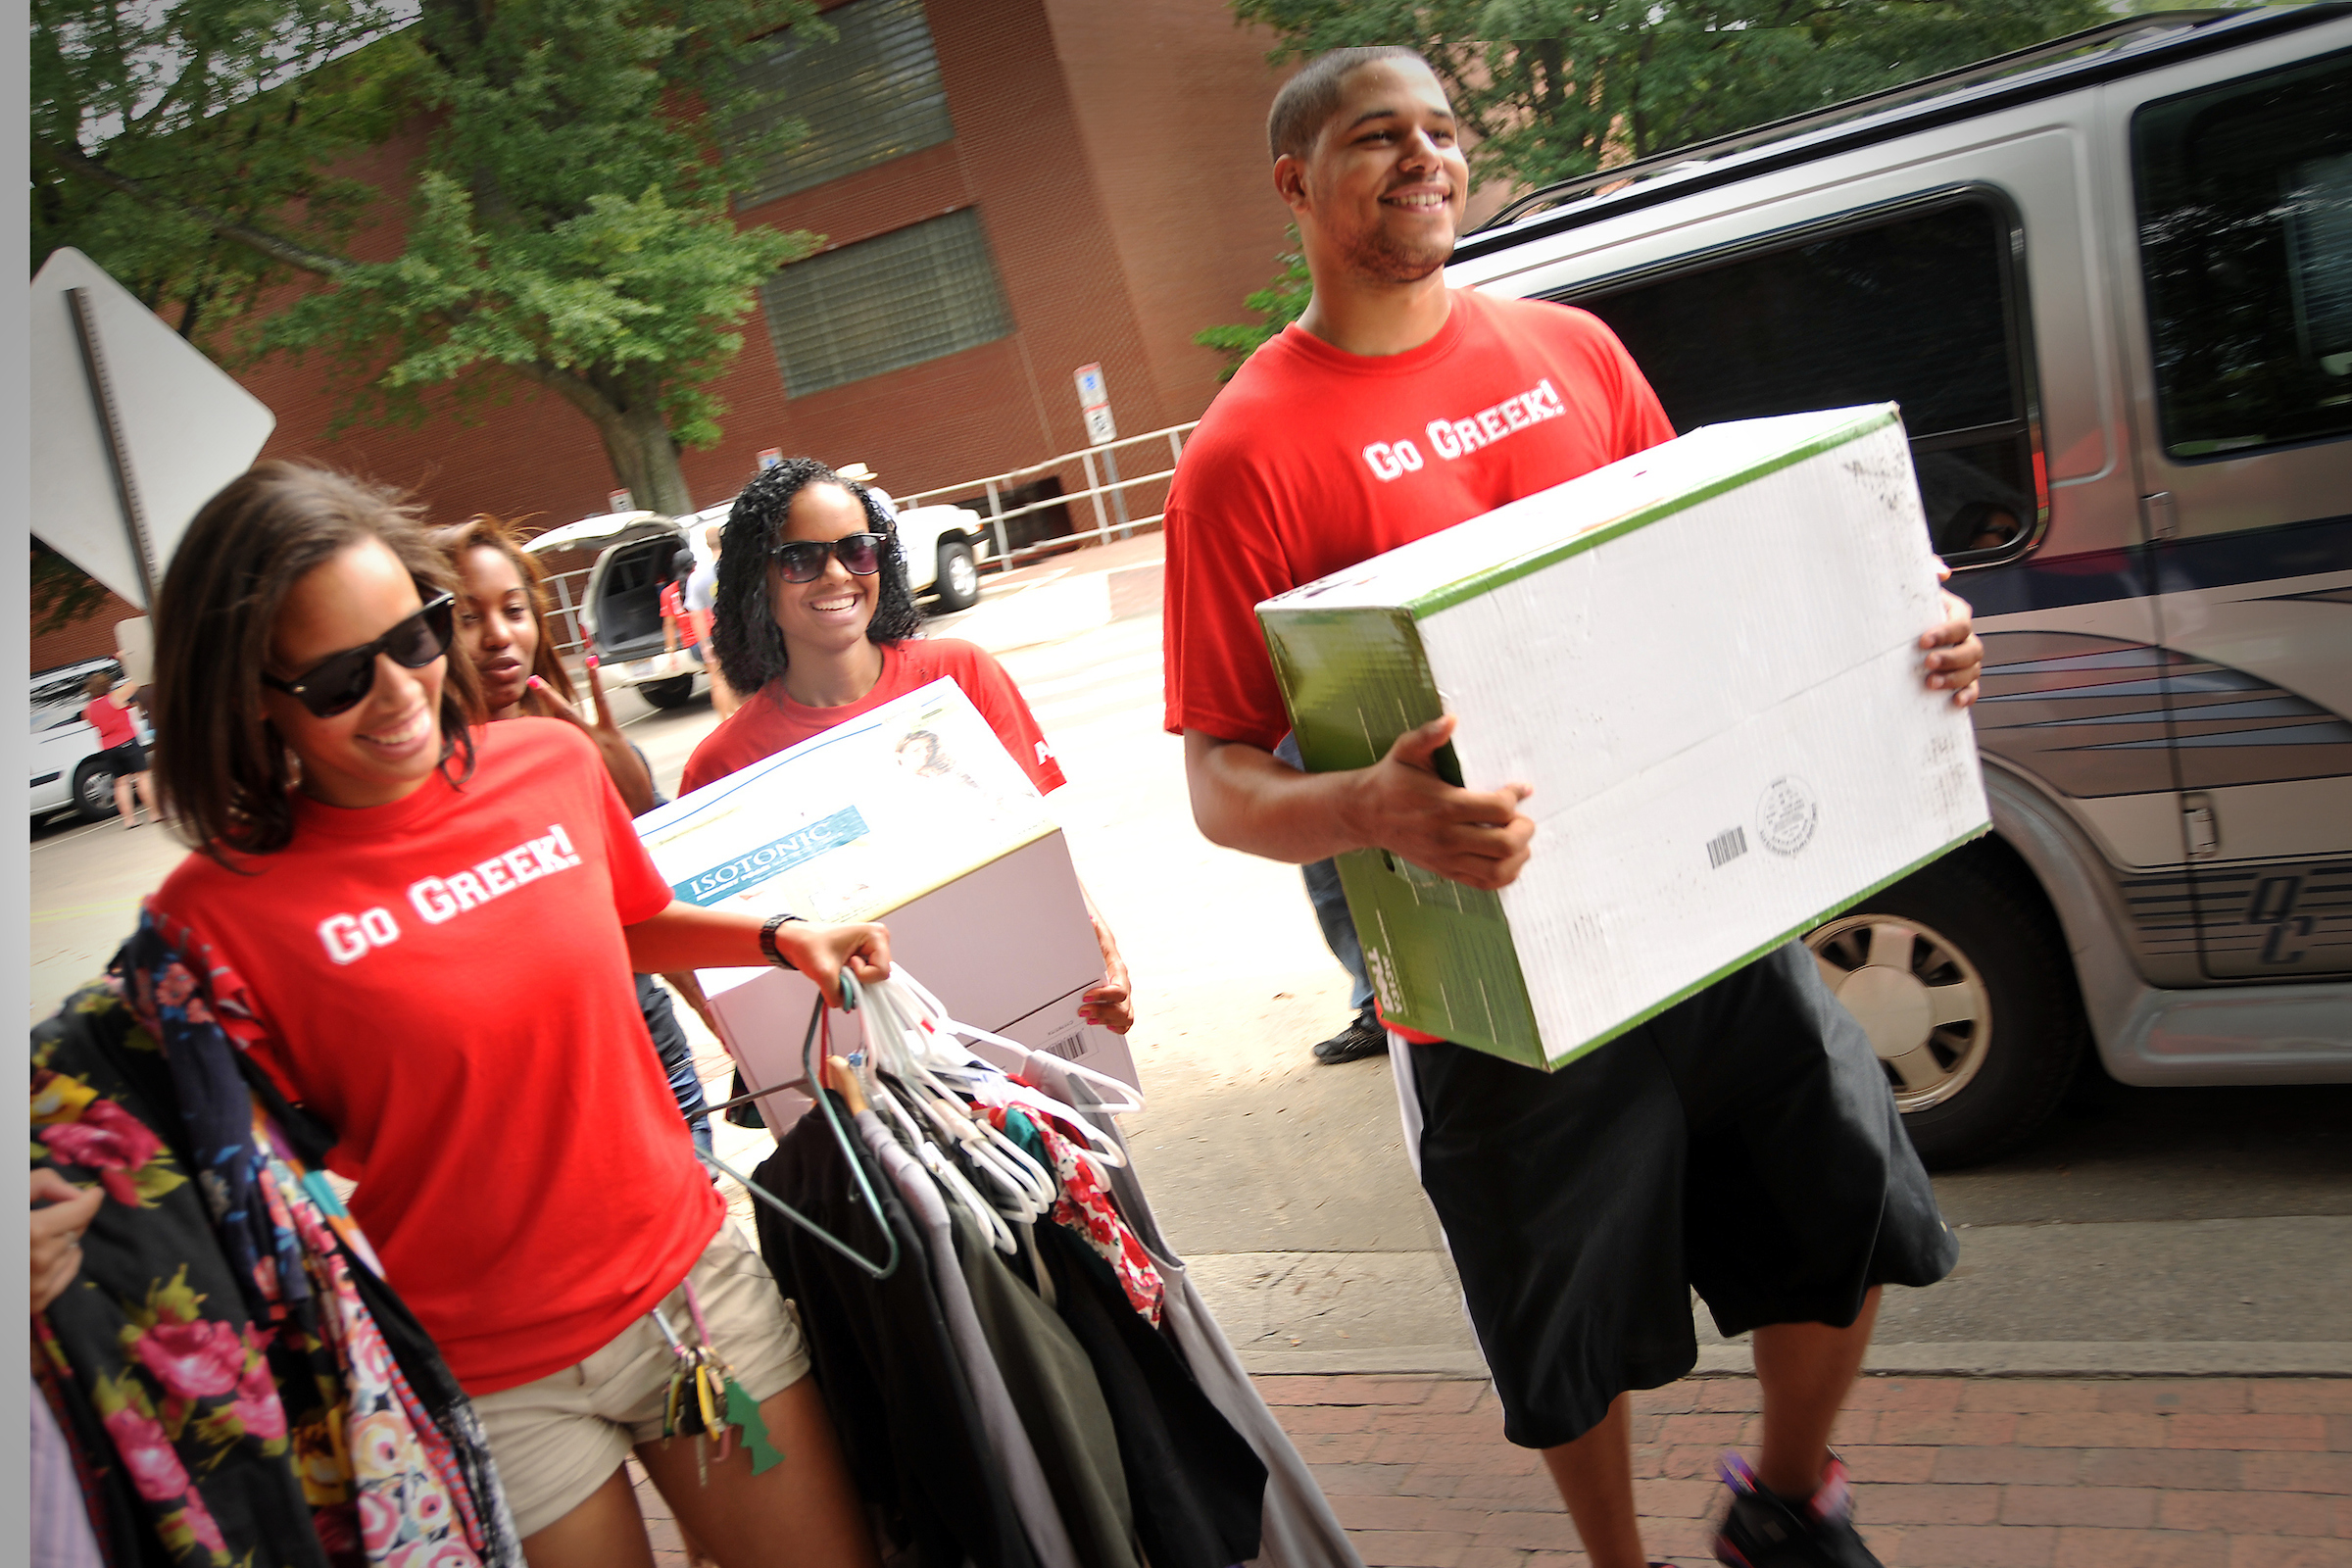 Fraternity and Sorority students help with move in to illstruate service opportunities on campus.